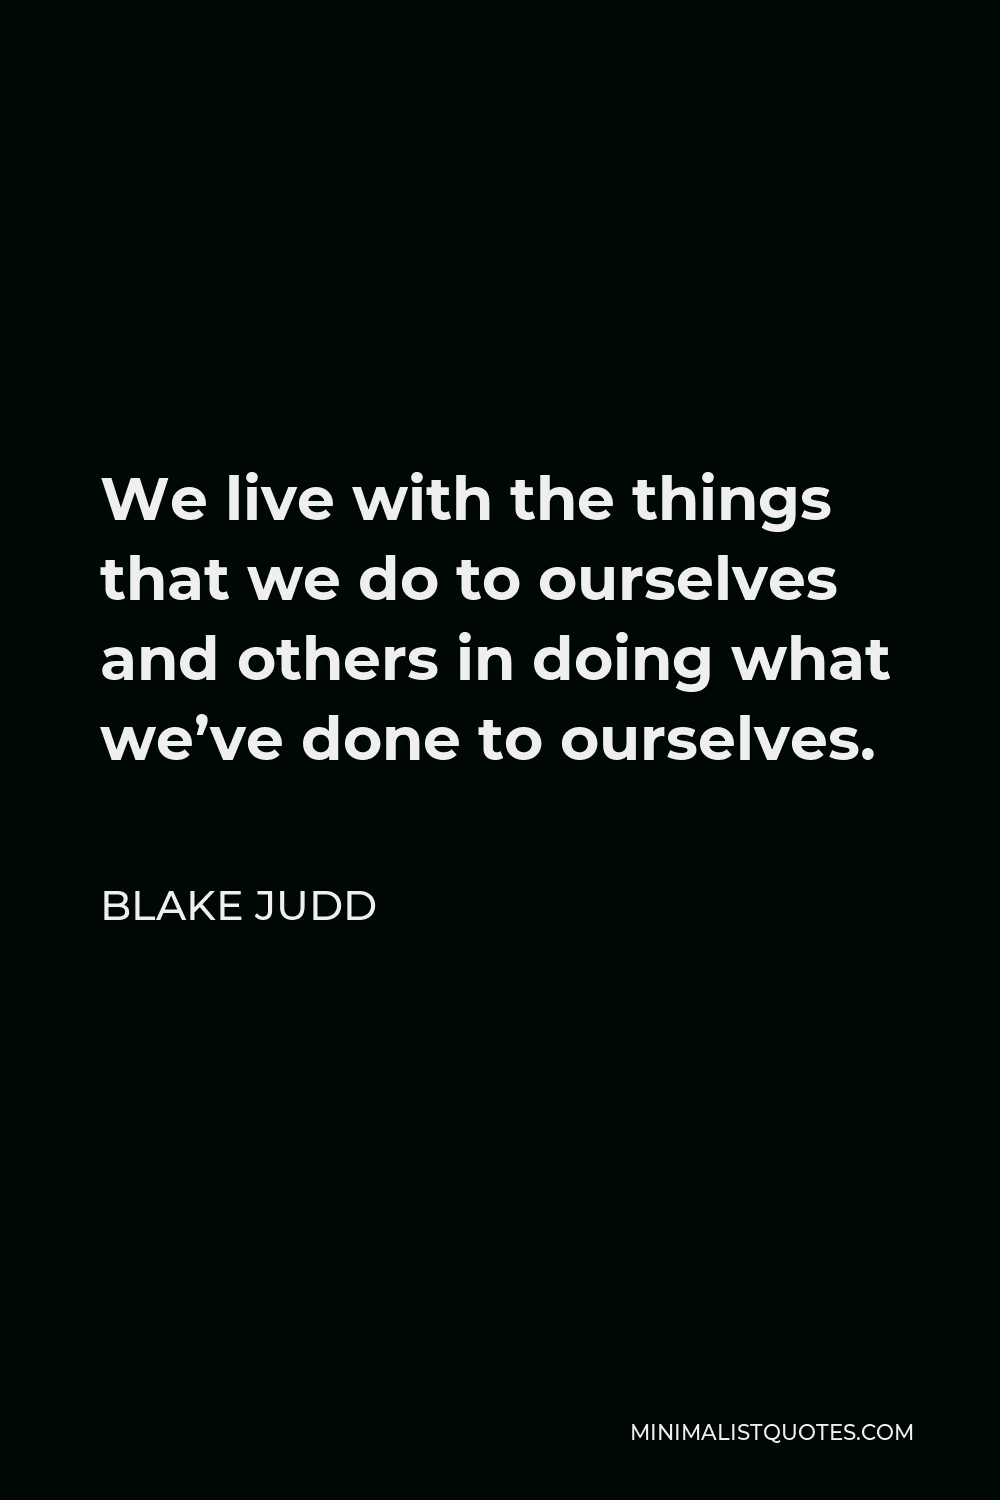 Blake Judd Quote - We live with the things that we do to ourselves and others in doing what we’ve done to ourselves.